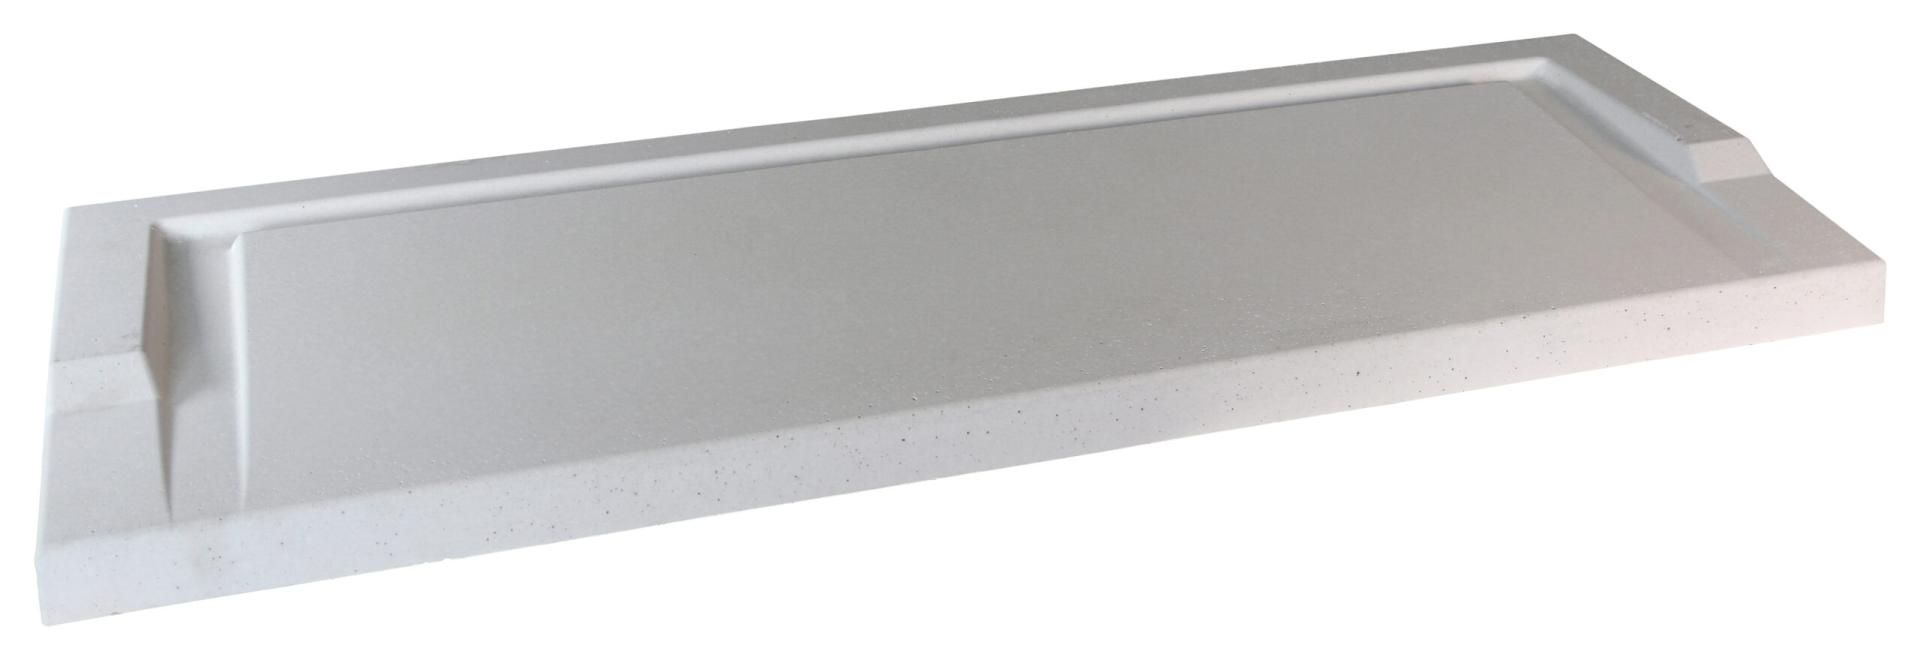 seuil-beton-pmr-lisse-35cm-90-100-daulouede-gris-0